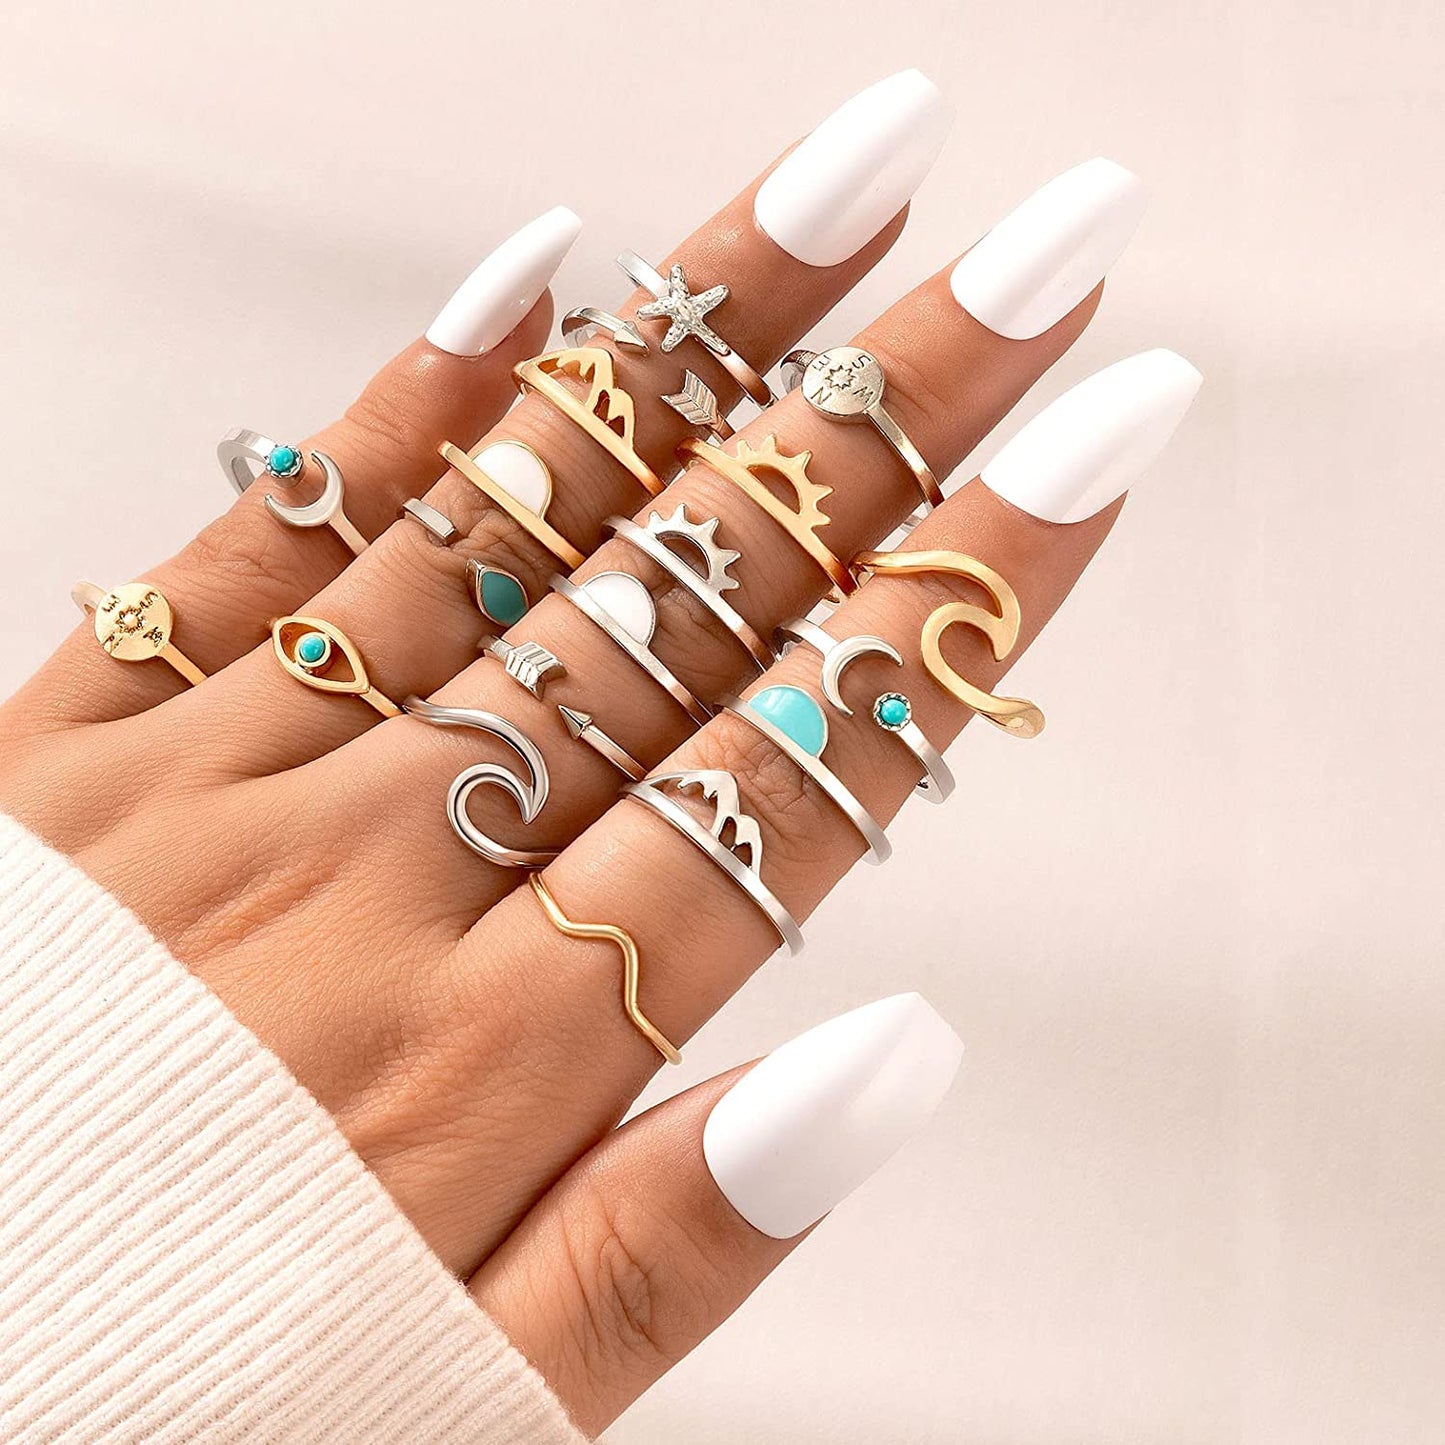 Boho Retro Stackable Rings Sets for Teens Girls Women,Peak Sea Wave Compass Turquoise Rhinestone Knuckle Joint Finger Kunckle Nail Ring Sets